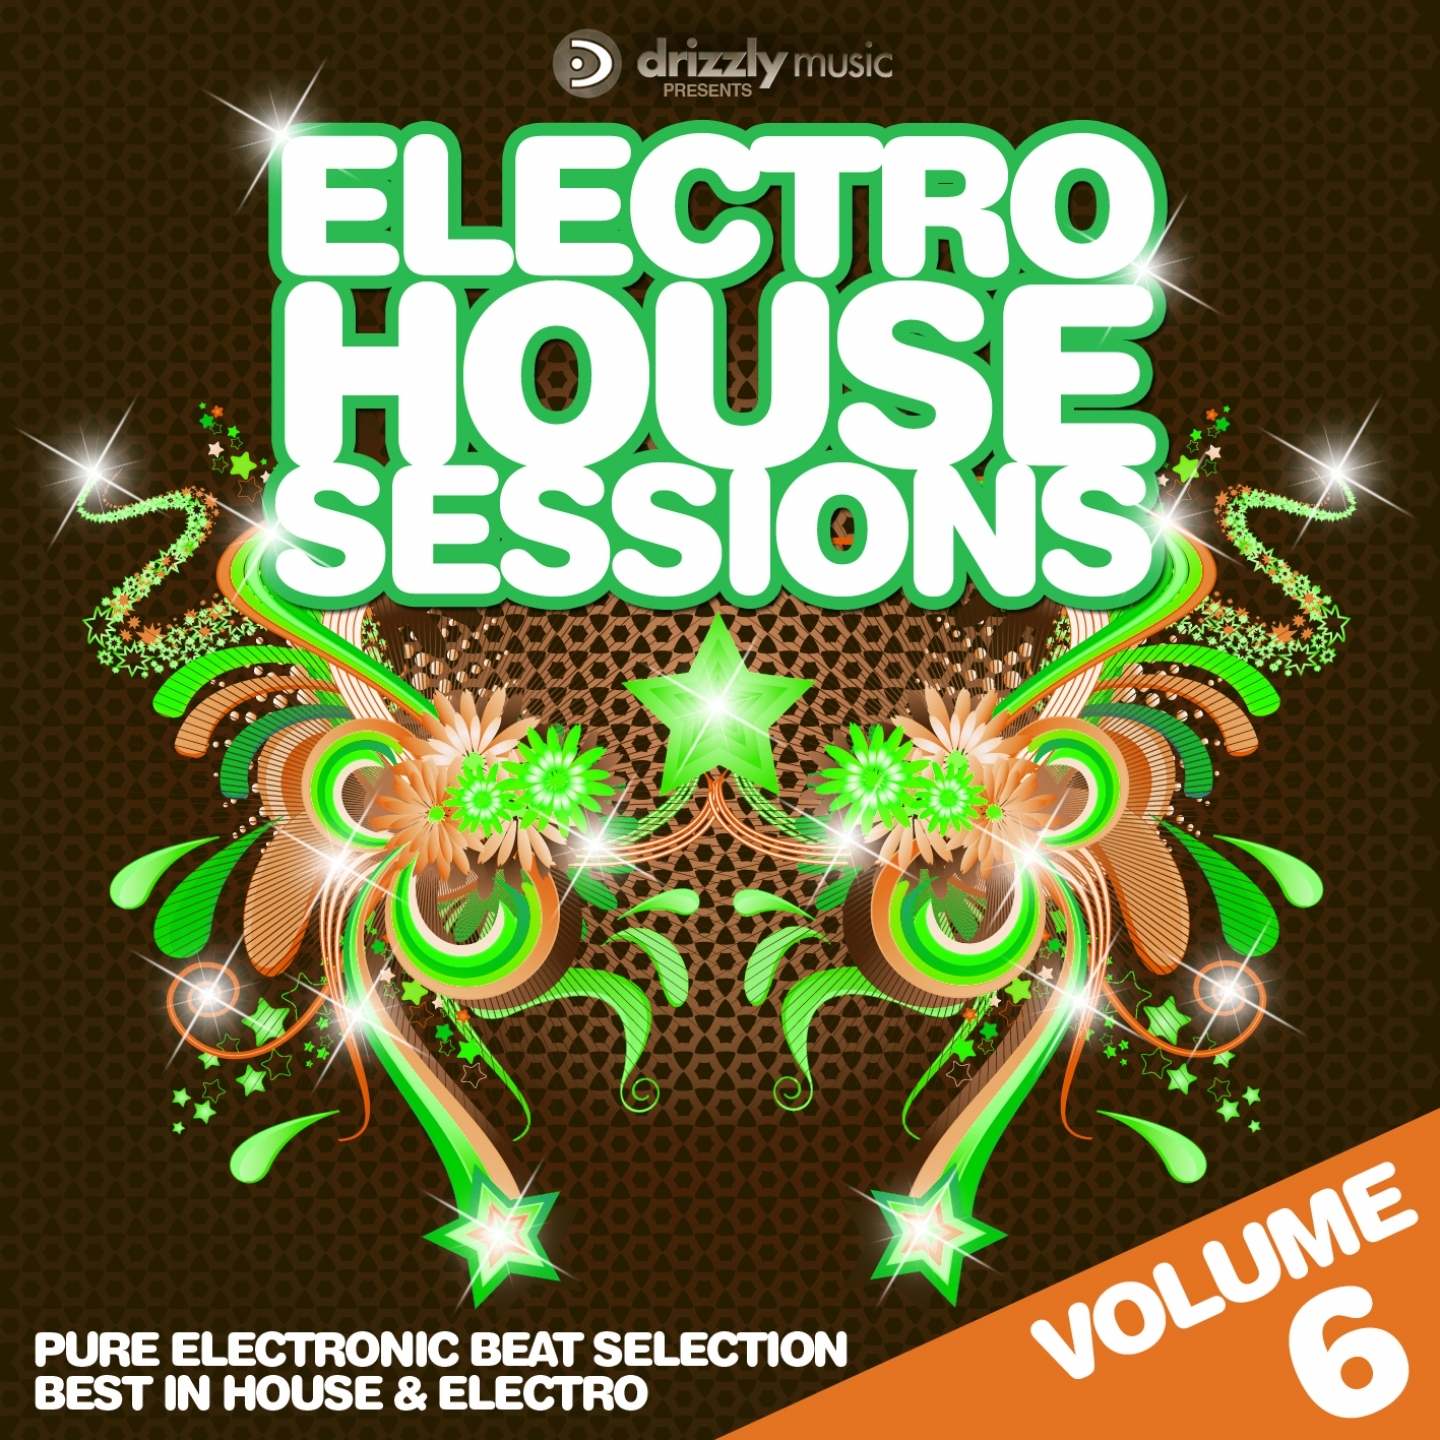 Electro House Sessions, Vol. 6 (Pure Electronic Beat Selection, Best in House & Electro)